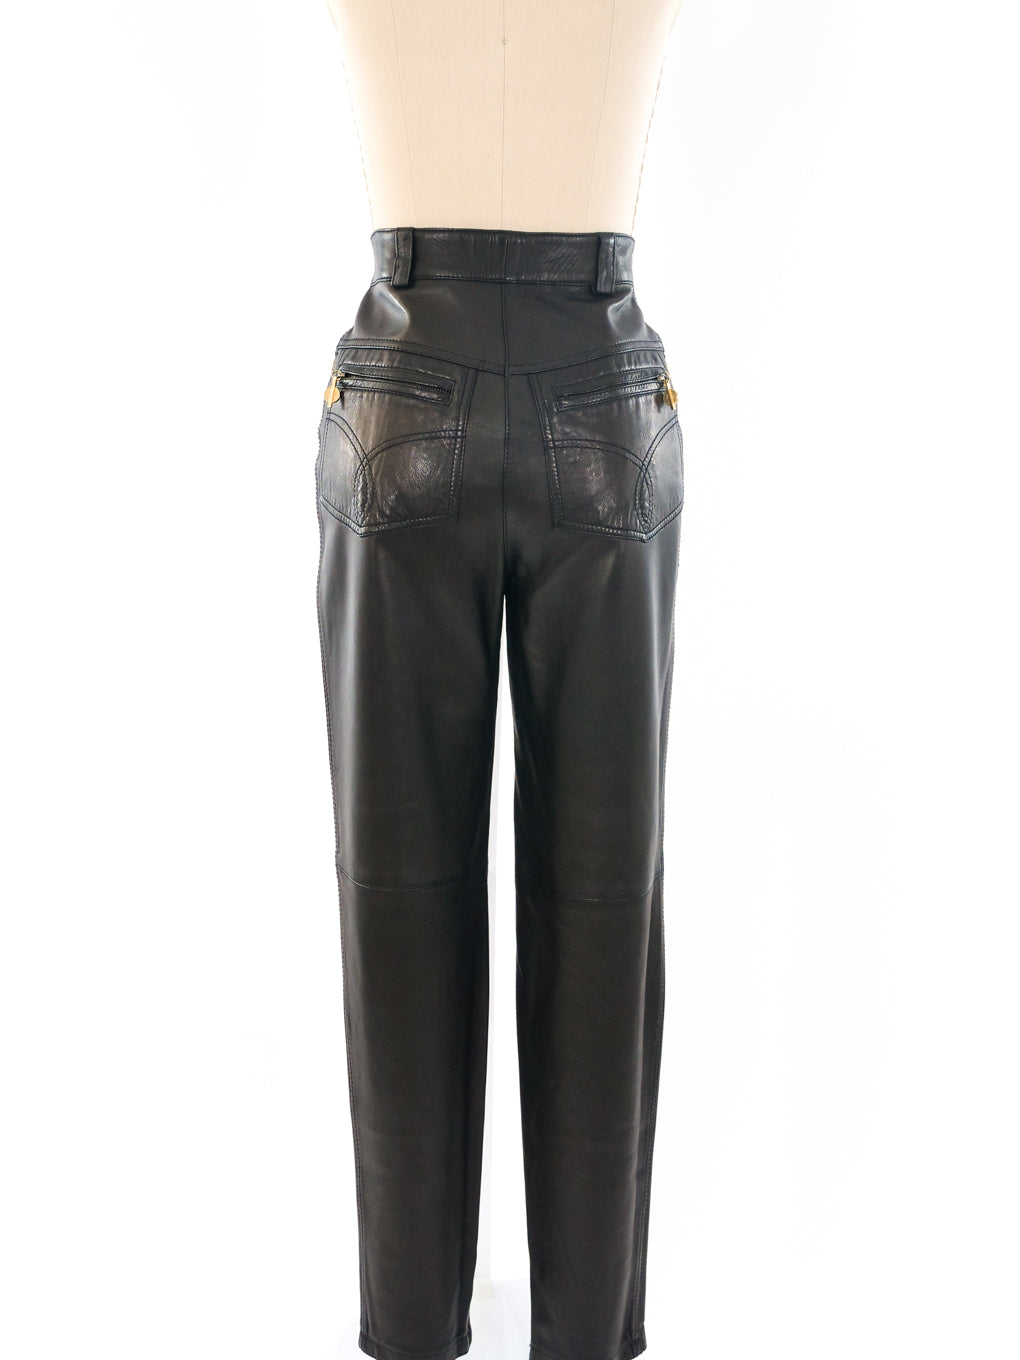 Gianni Versace Leather Pant